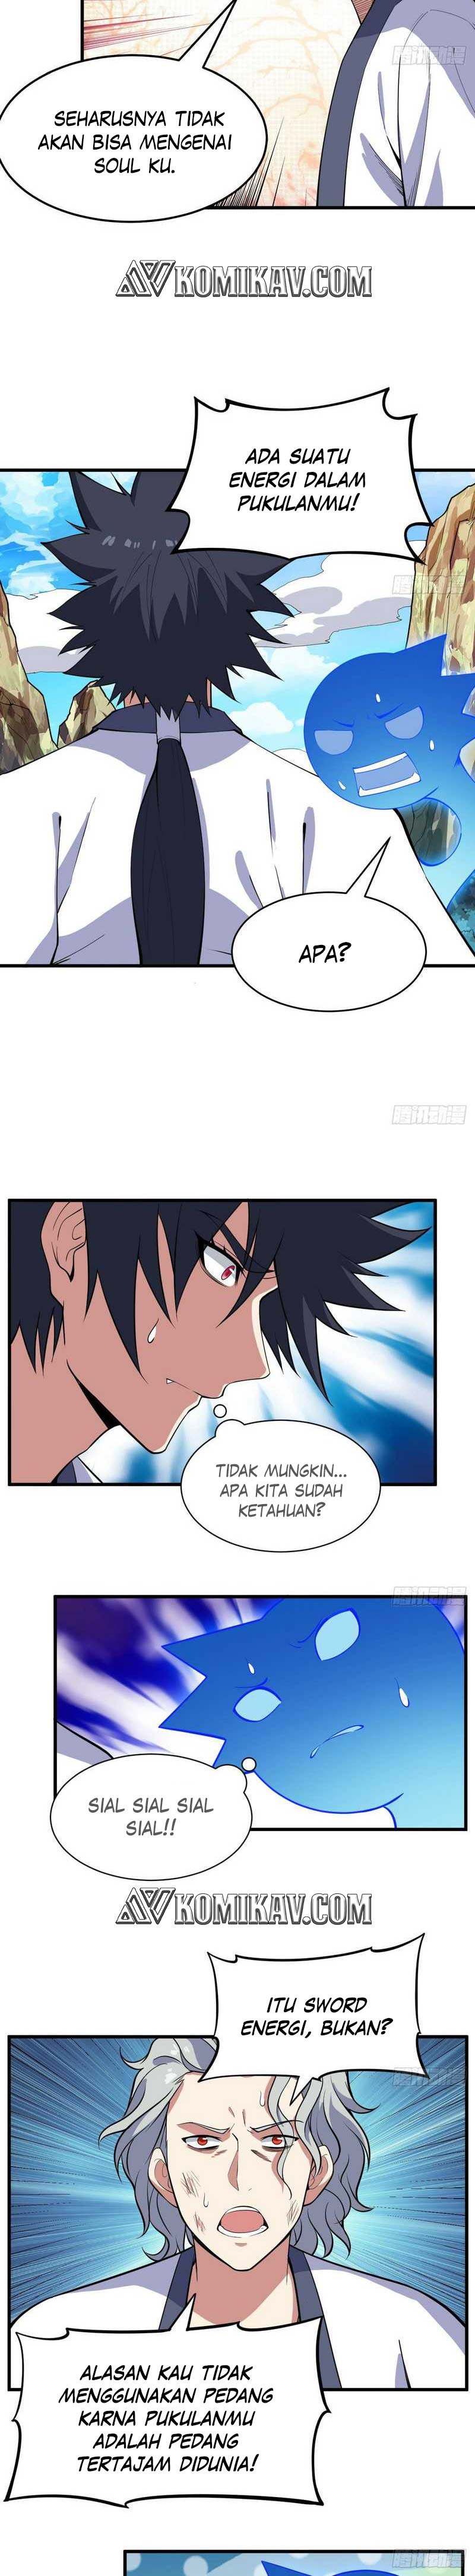 Dilarang COPAS - situs resmi www.mangacanblog.com - Komik i just want to be beaten to death by everyone 085 - chapter 85 86 Indonesia i just want to be beaten to death by everyone 085 - chapter 85 Terbaru 10|Baca Manga Komik Indonesia|Mangacan